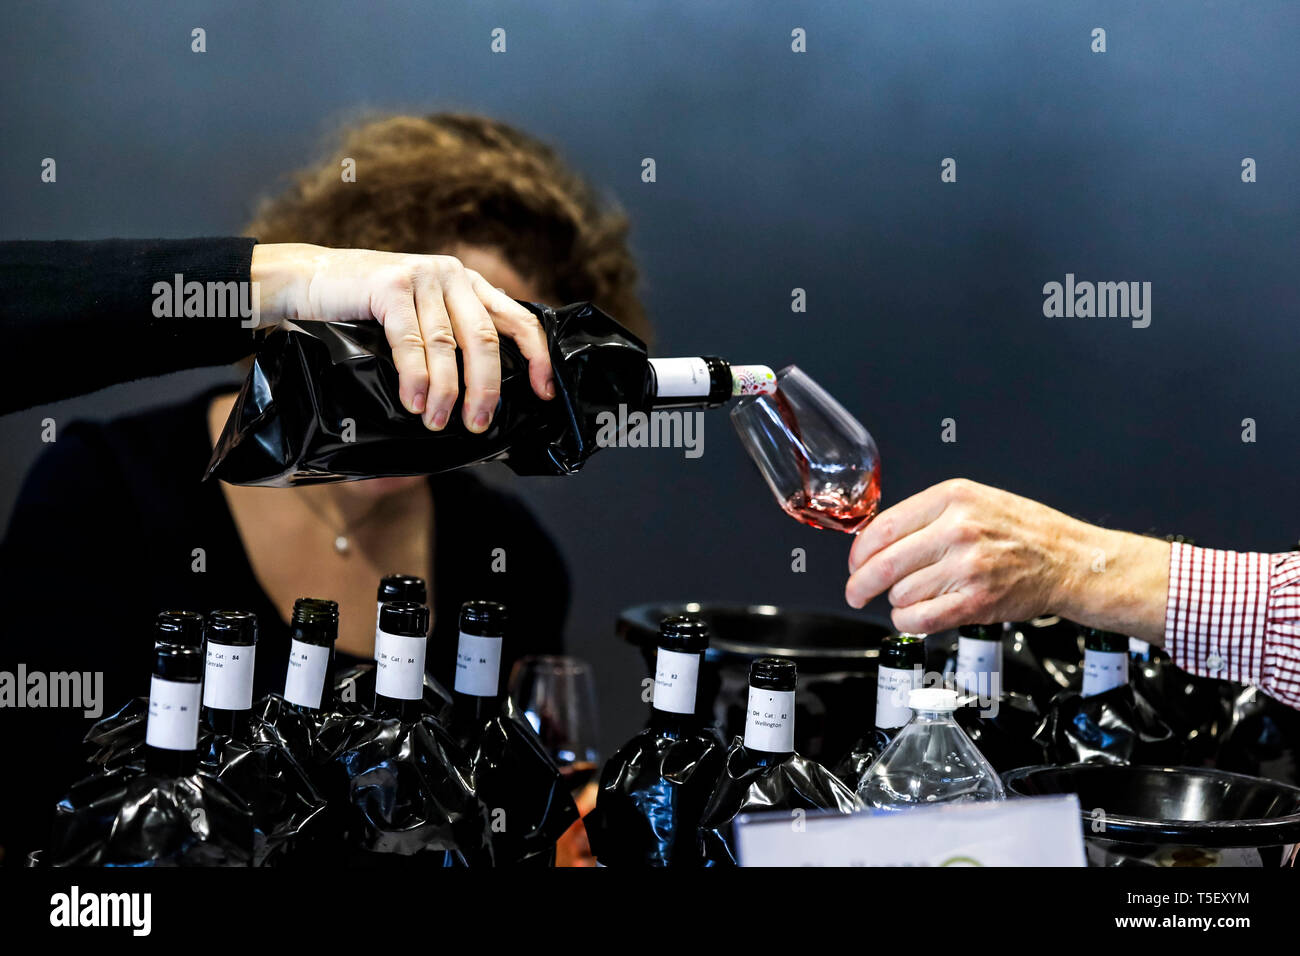 Illustration, blind wine tasting contest: bottle of wine with a sleeve hiding the label and someone pouring some wine in a glass Stock Photo